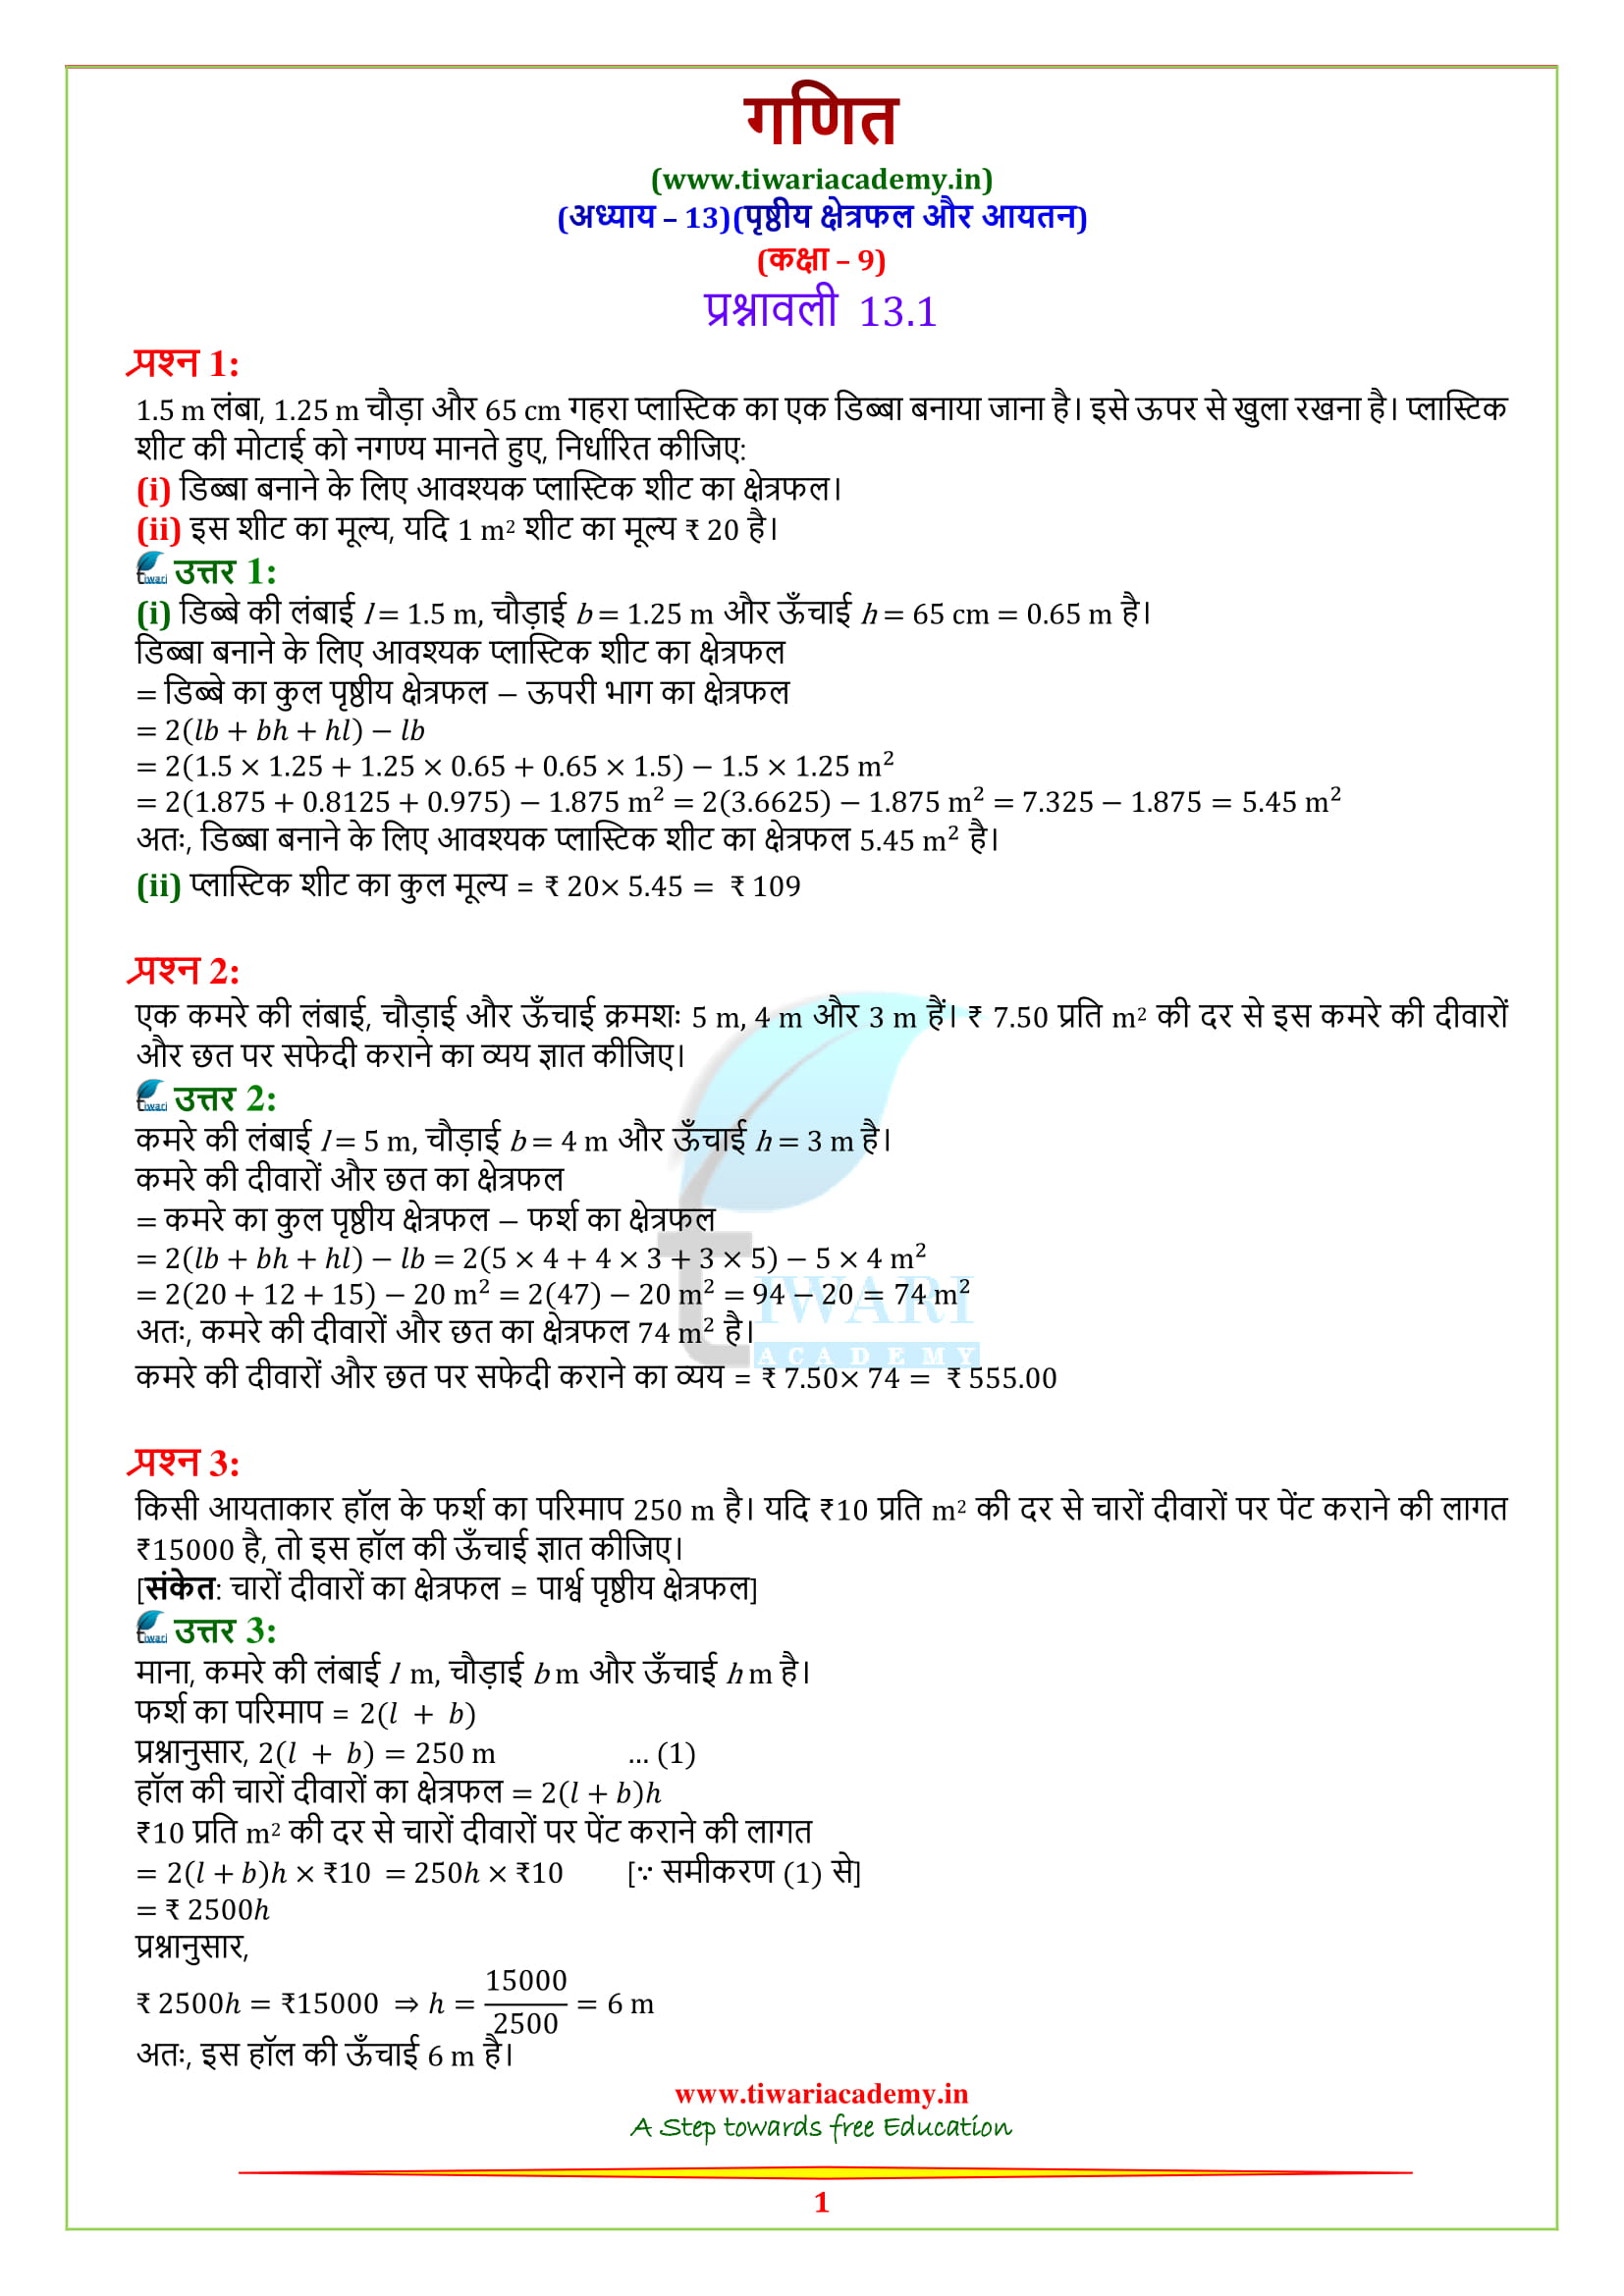 NCERT Solutions for class 9 Exercise 13.1 in hindi medium